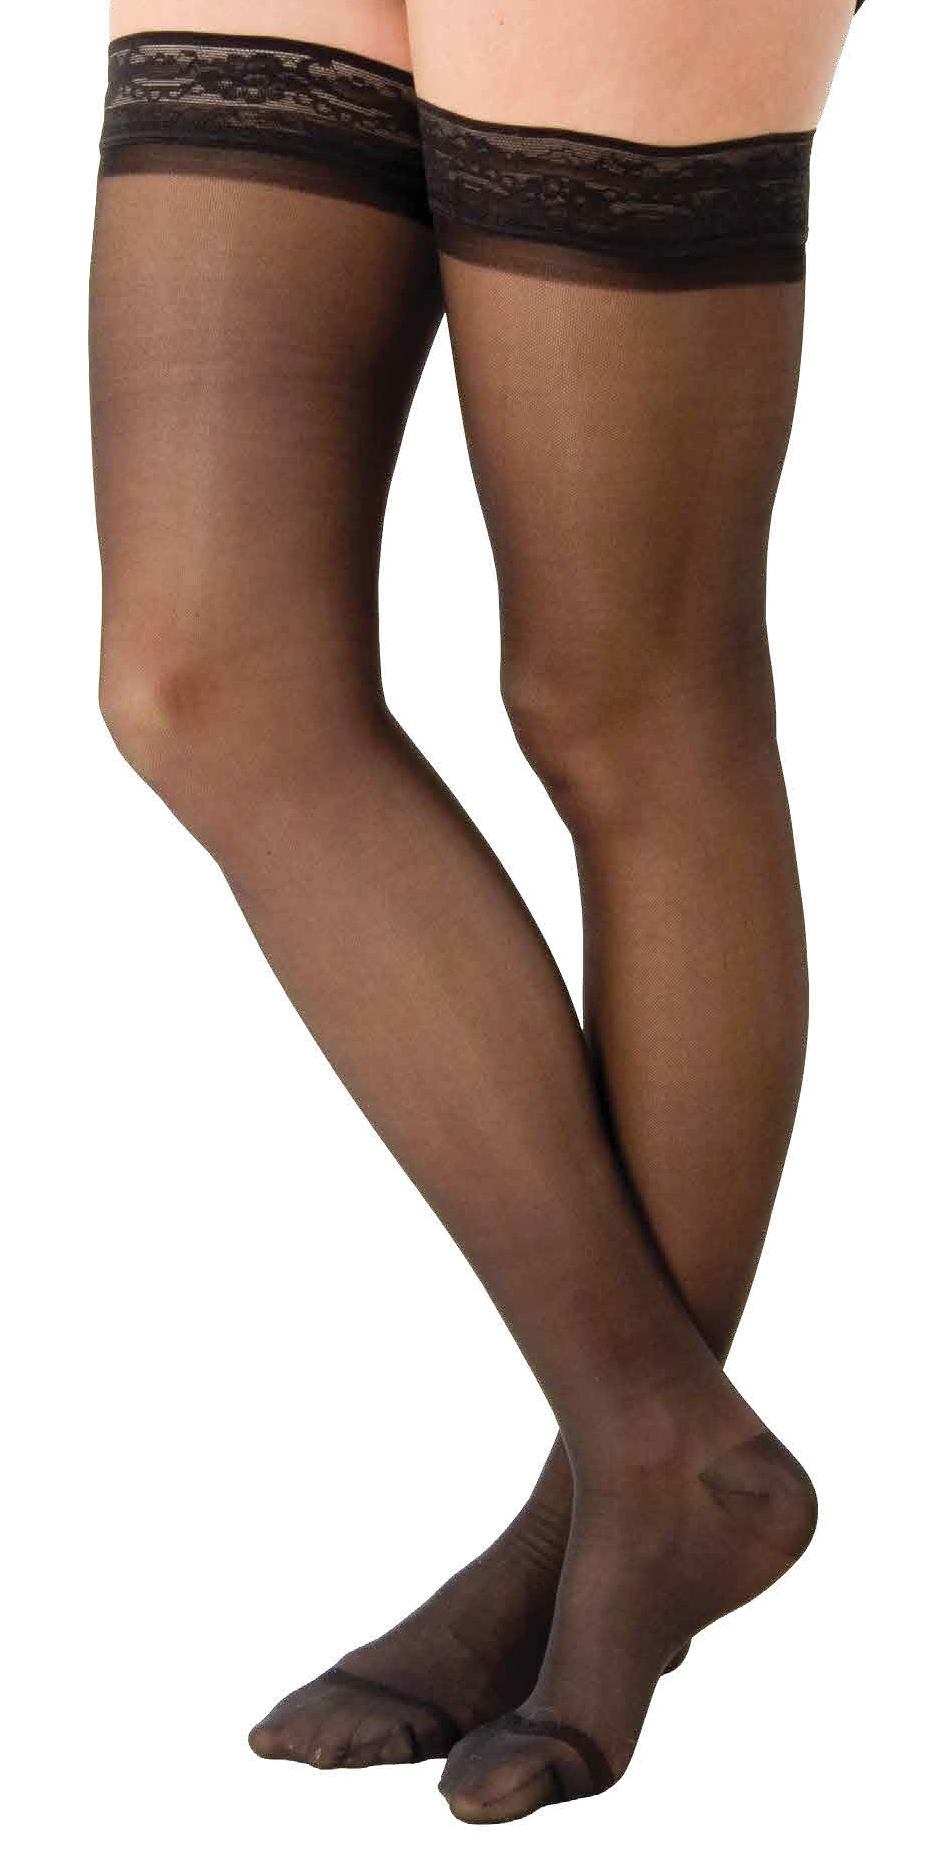 Support Plus Women's Sheer Closed Toe Mild Compression Pantyhose